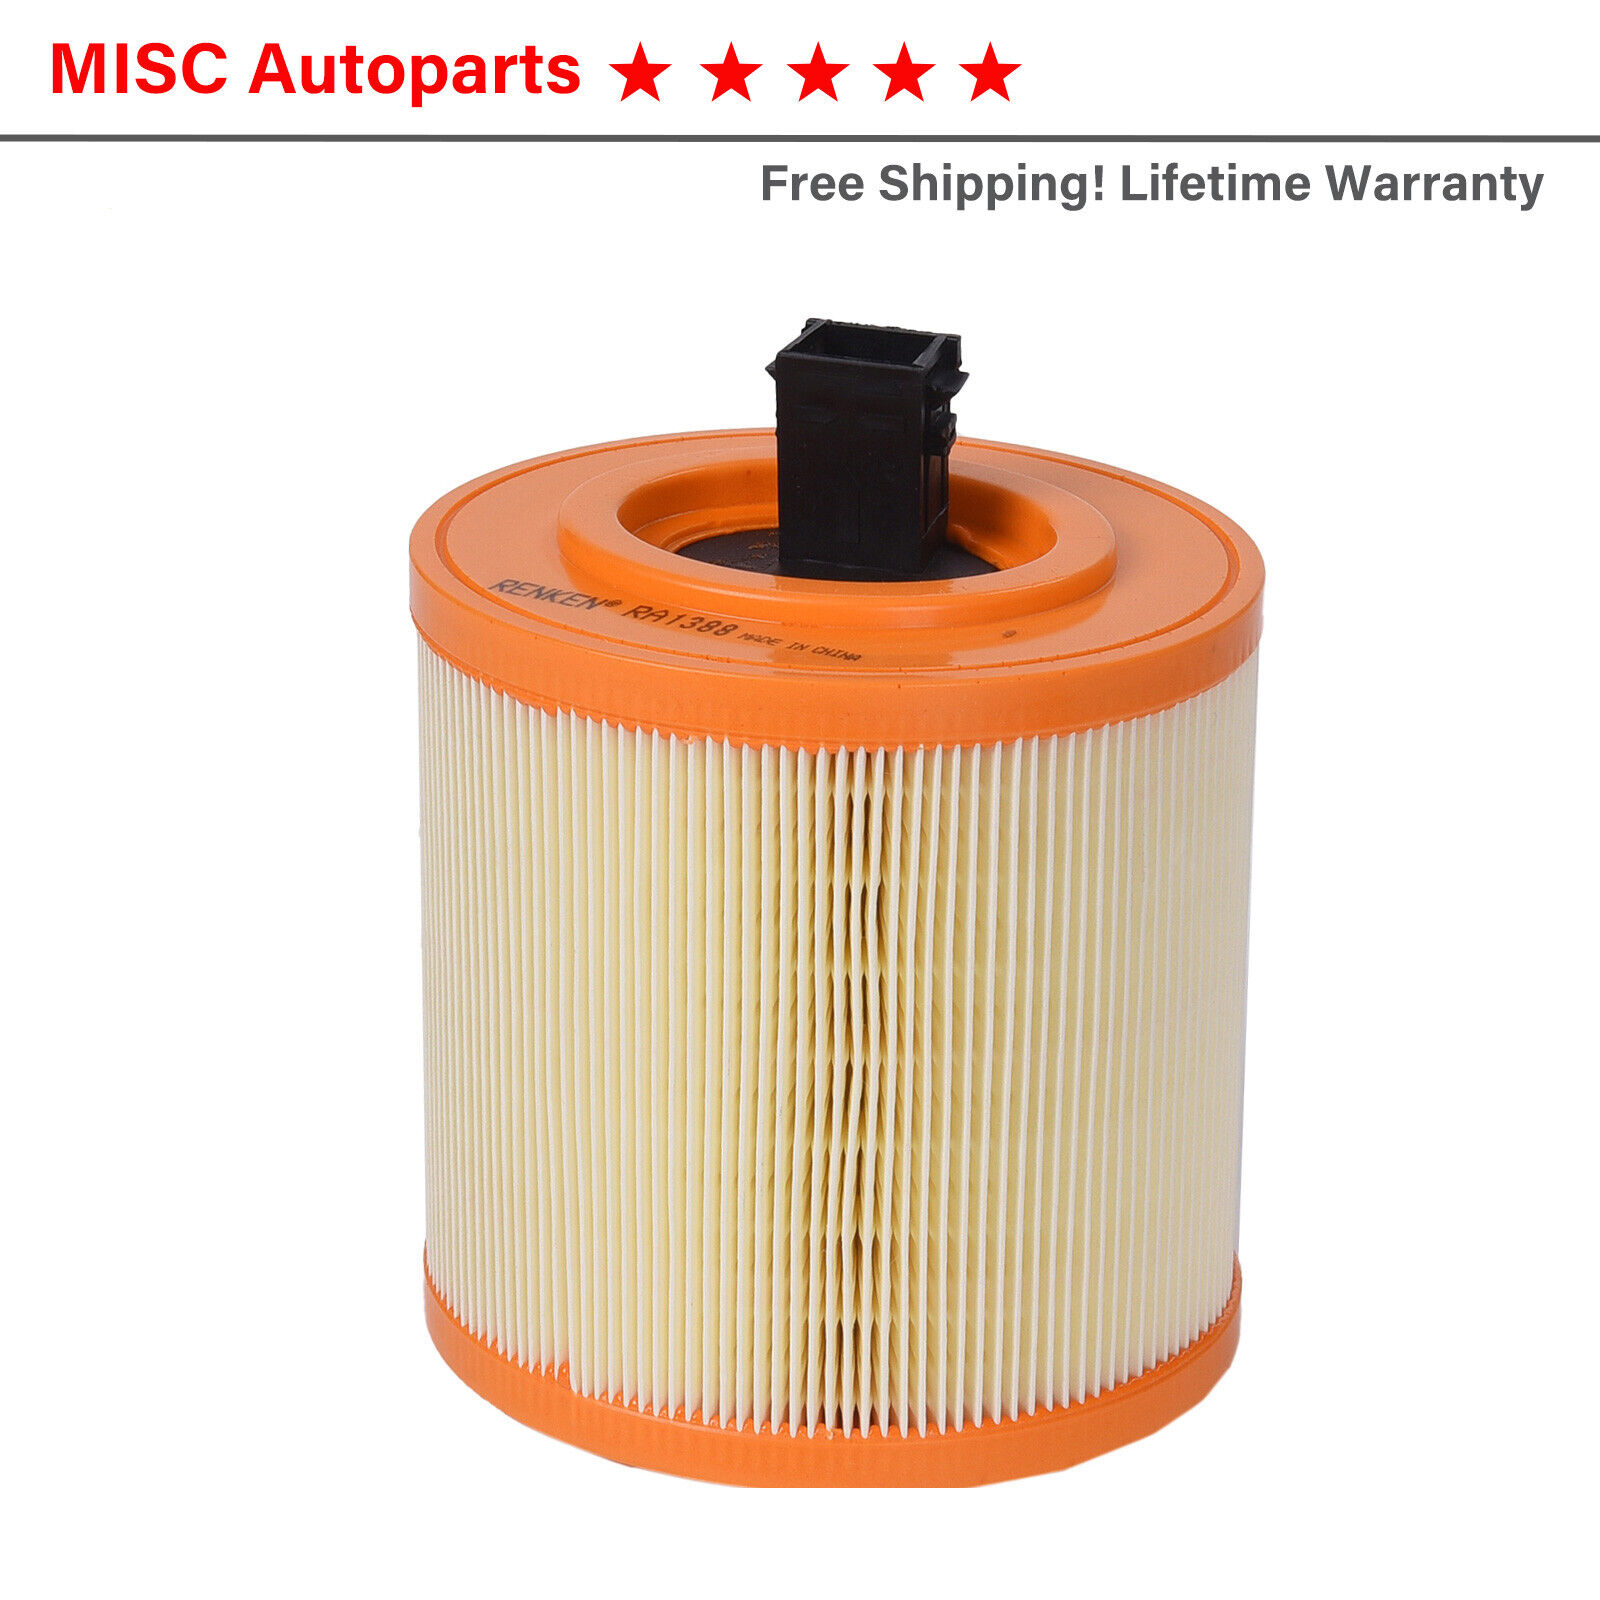 Engine Air Filter for 2016-2019 Chevy Cruze 1.4L Cadillac ATS V6 Twin-Turbo